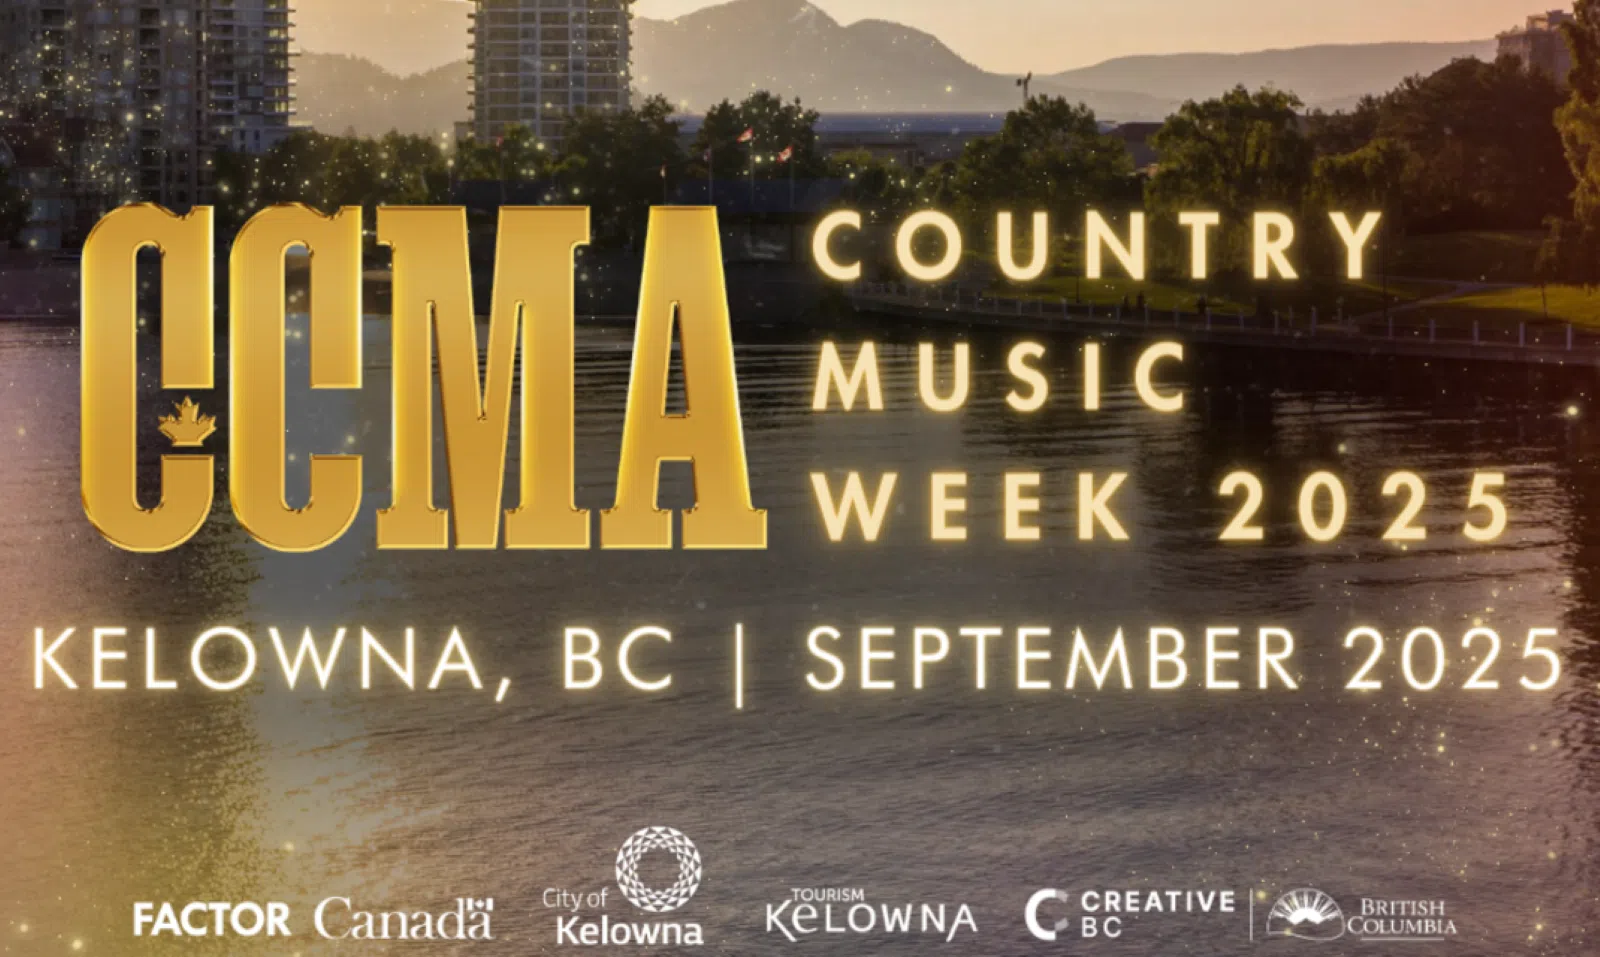 Canadian Country Music Awards coming to southern BC next year